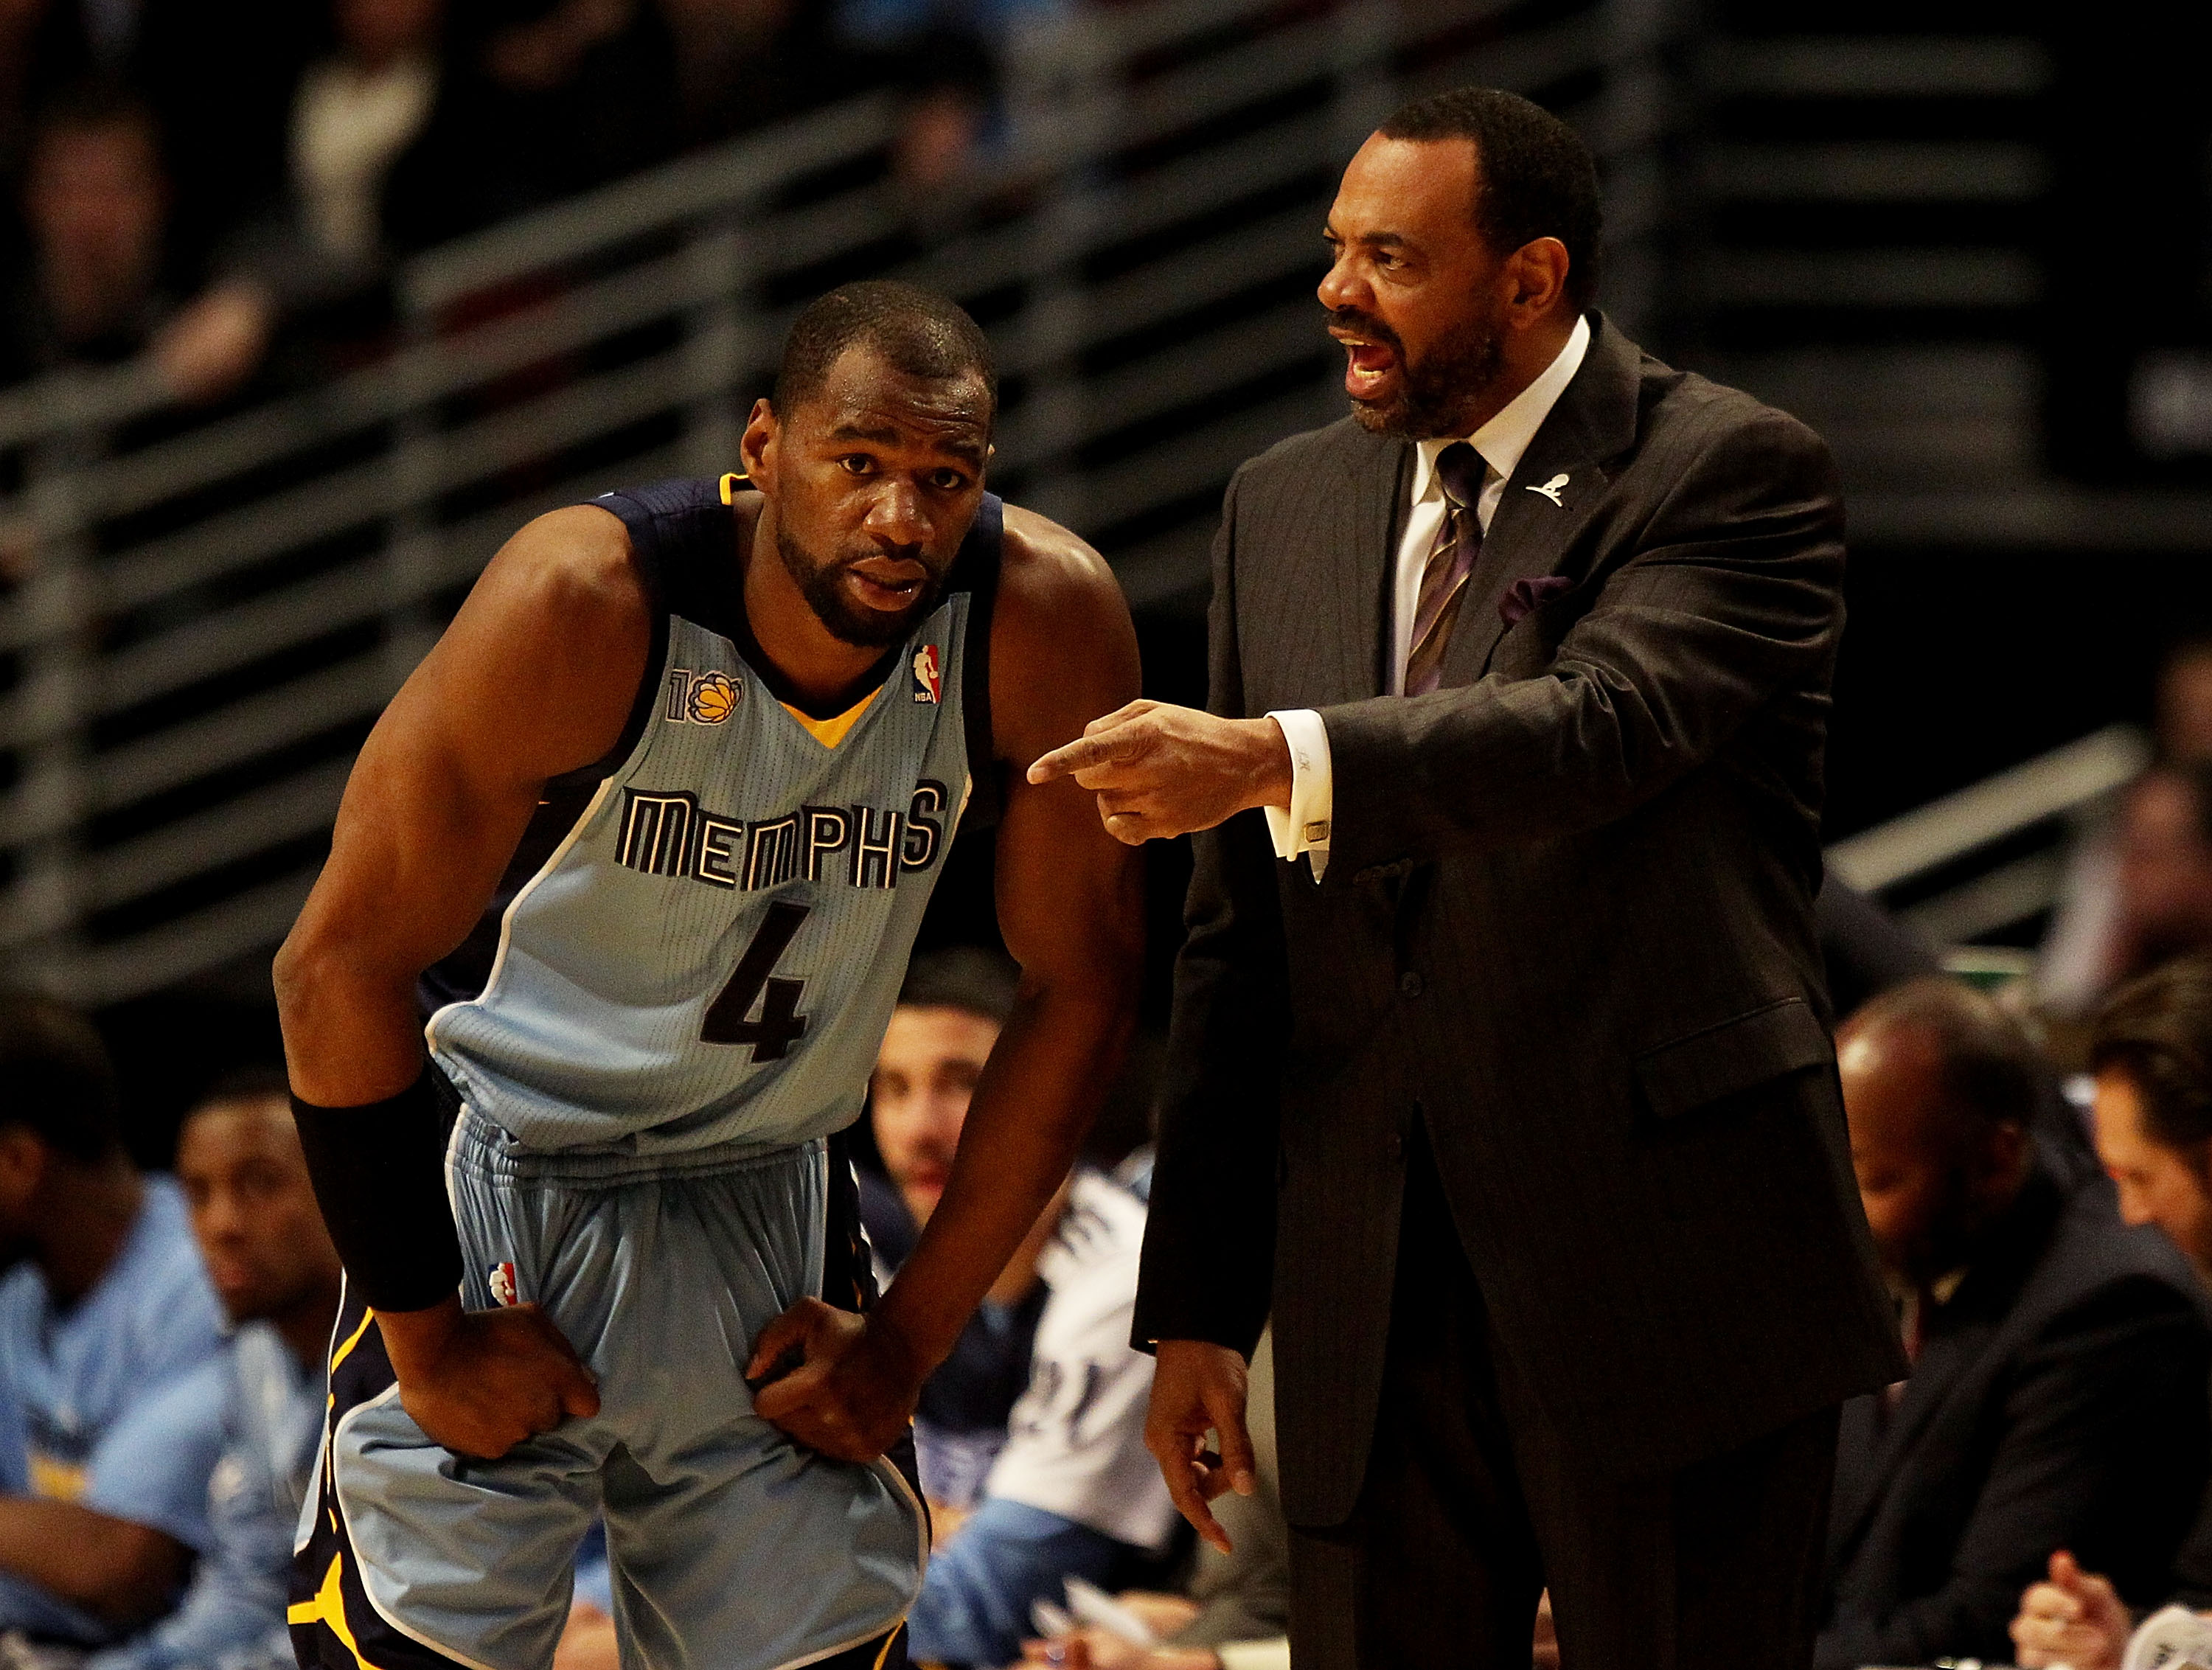 CHICAGO, IL - MARCH 25: Head coach Lionel Hollins  of the Memphis Grizzlies gives instructions to Sam Young #4 during a game against the Chicago Bulls at the United Center on March 25, 2011 in Chicago, Illinois. The Bulls defeated the Grizzlies 99-96. NOT